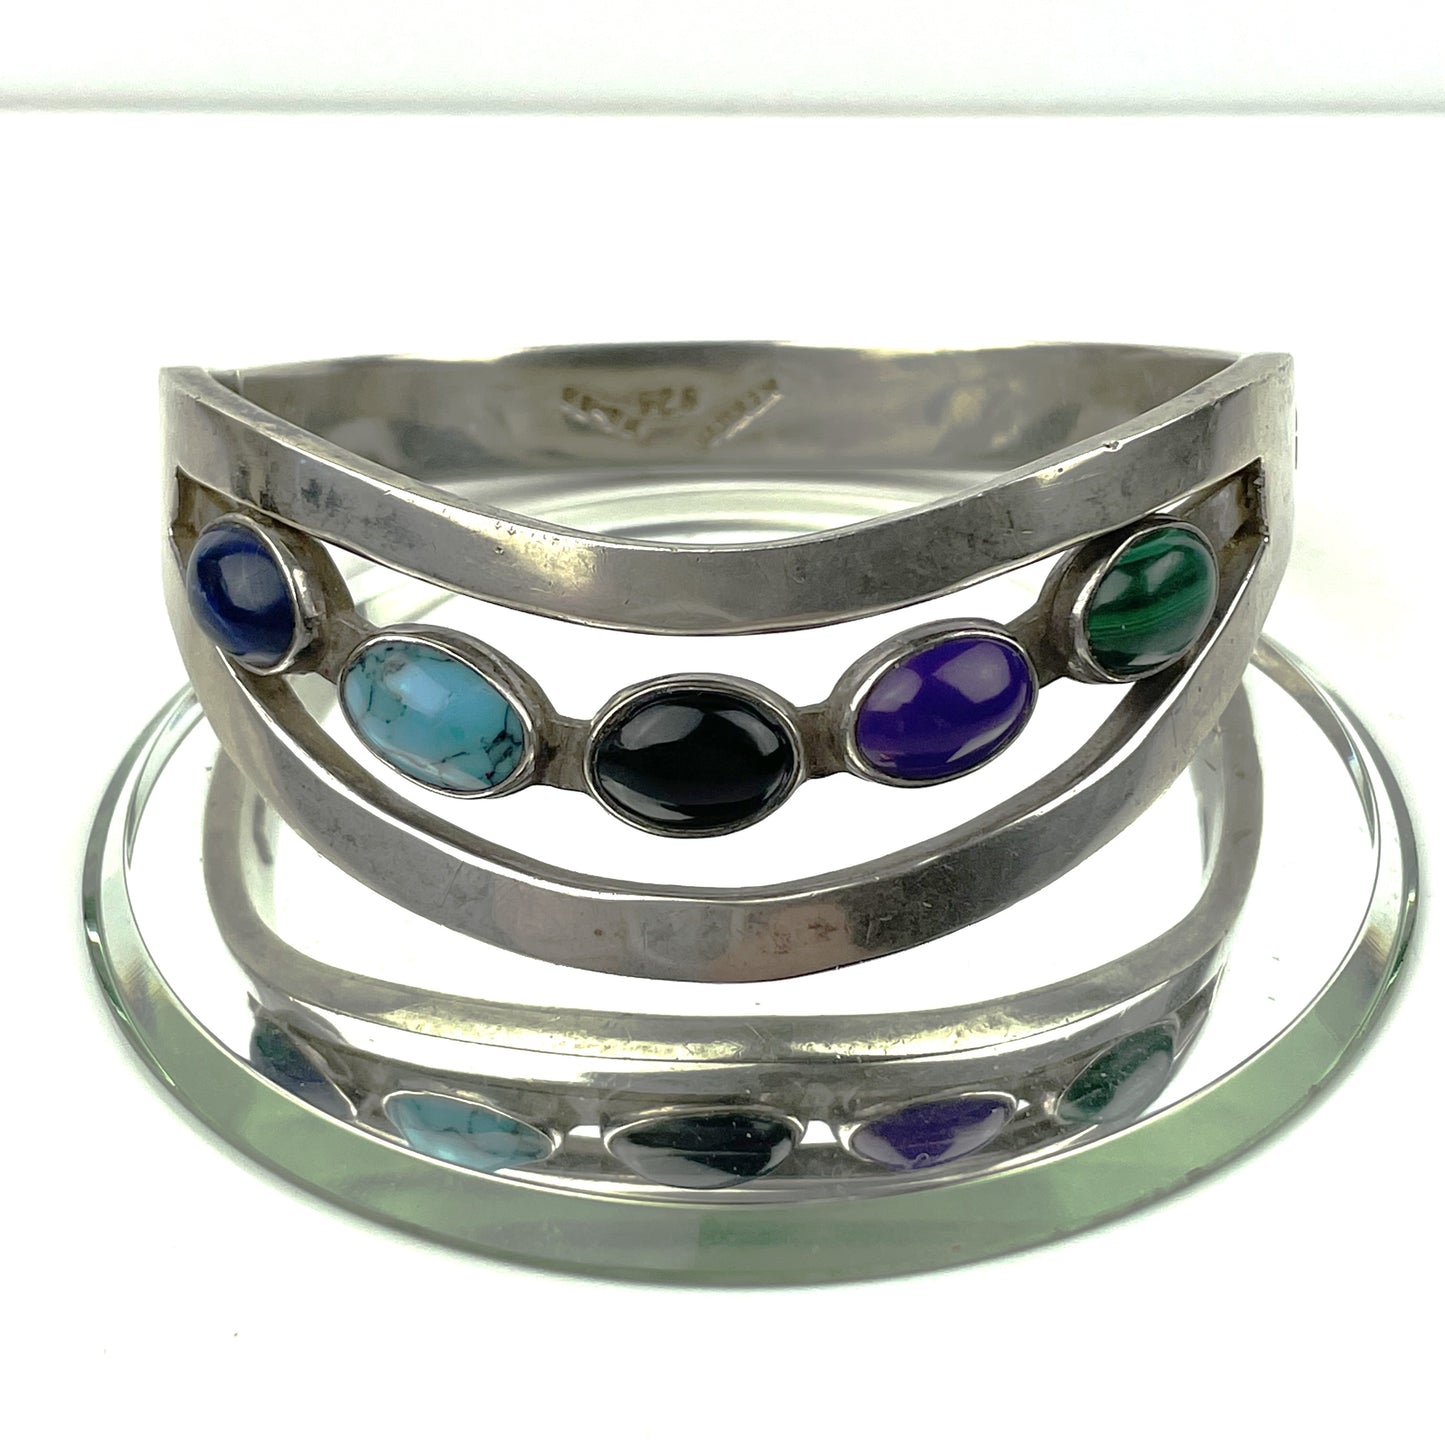 Vintage Mexican Sterling Silver & Semi Precious Stone Cut-Out Cuff Bracelet